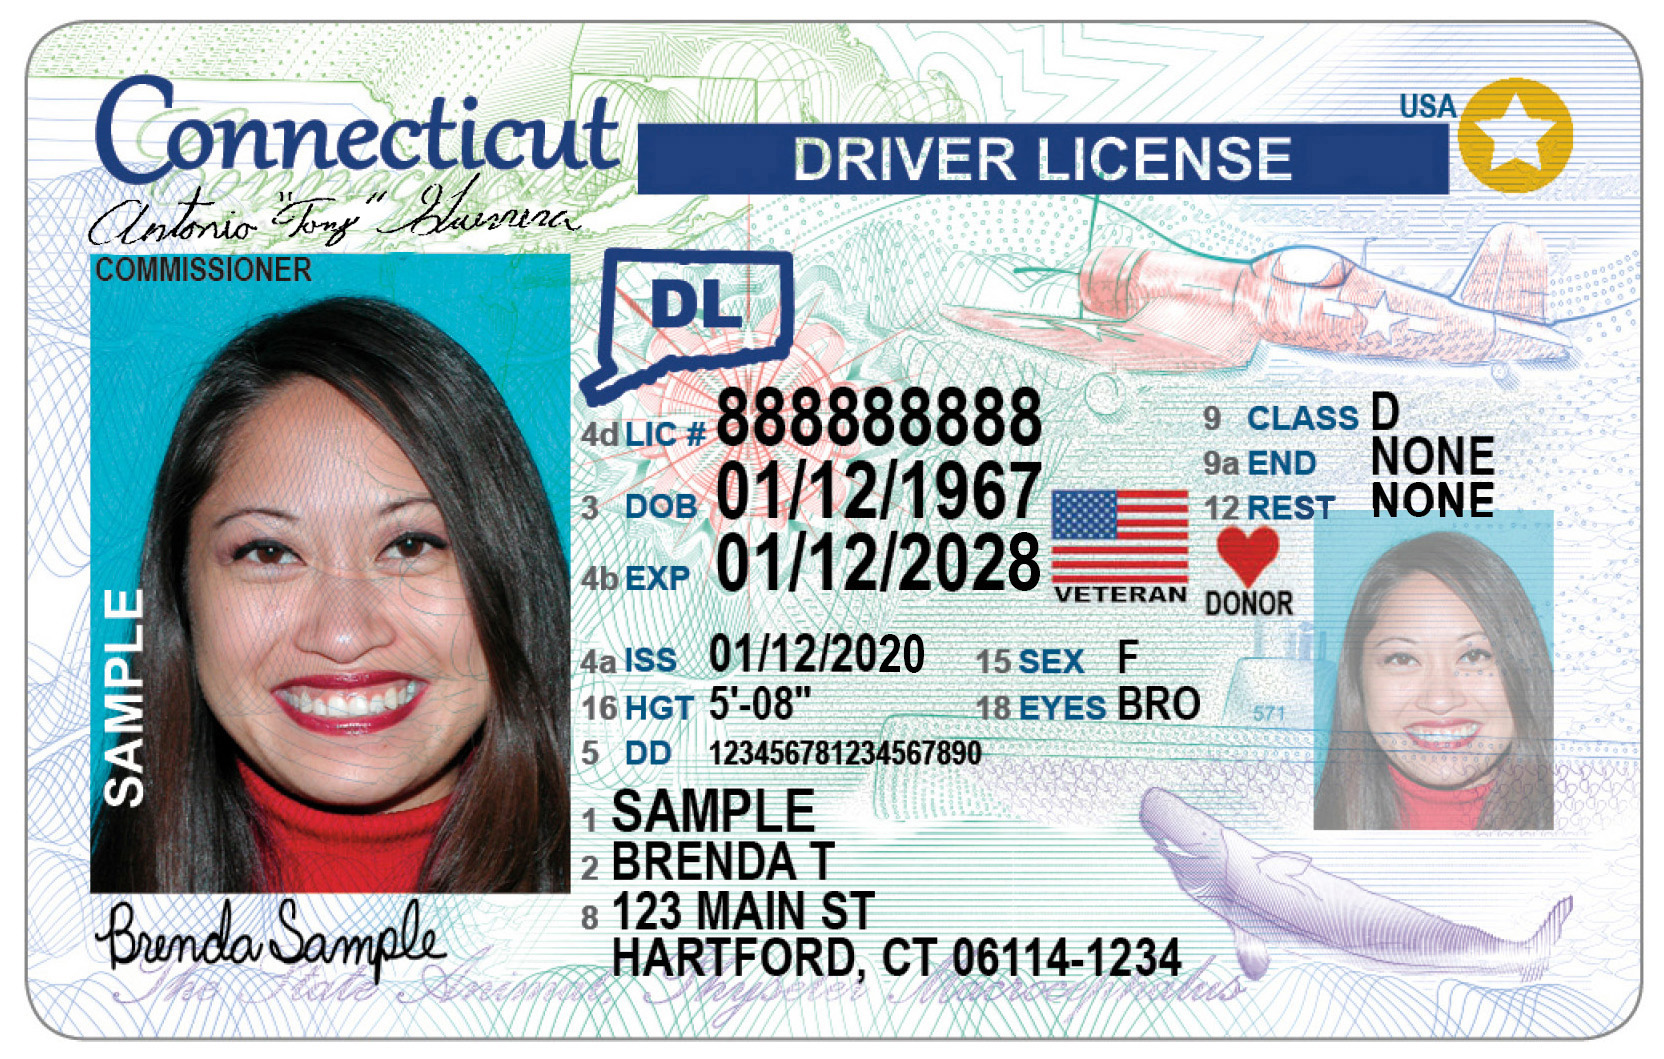 Everything you need to know to get your driver's license - The HUB